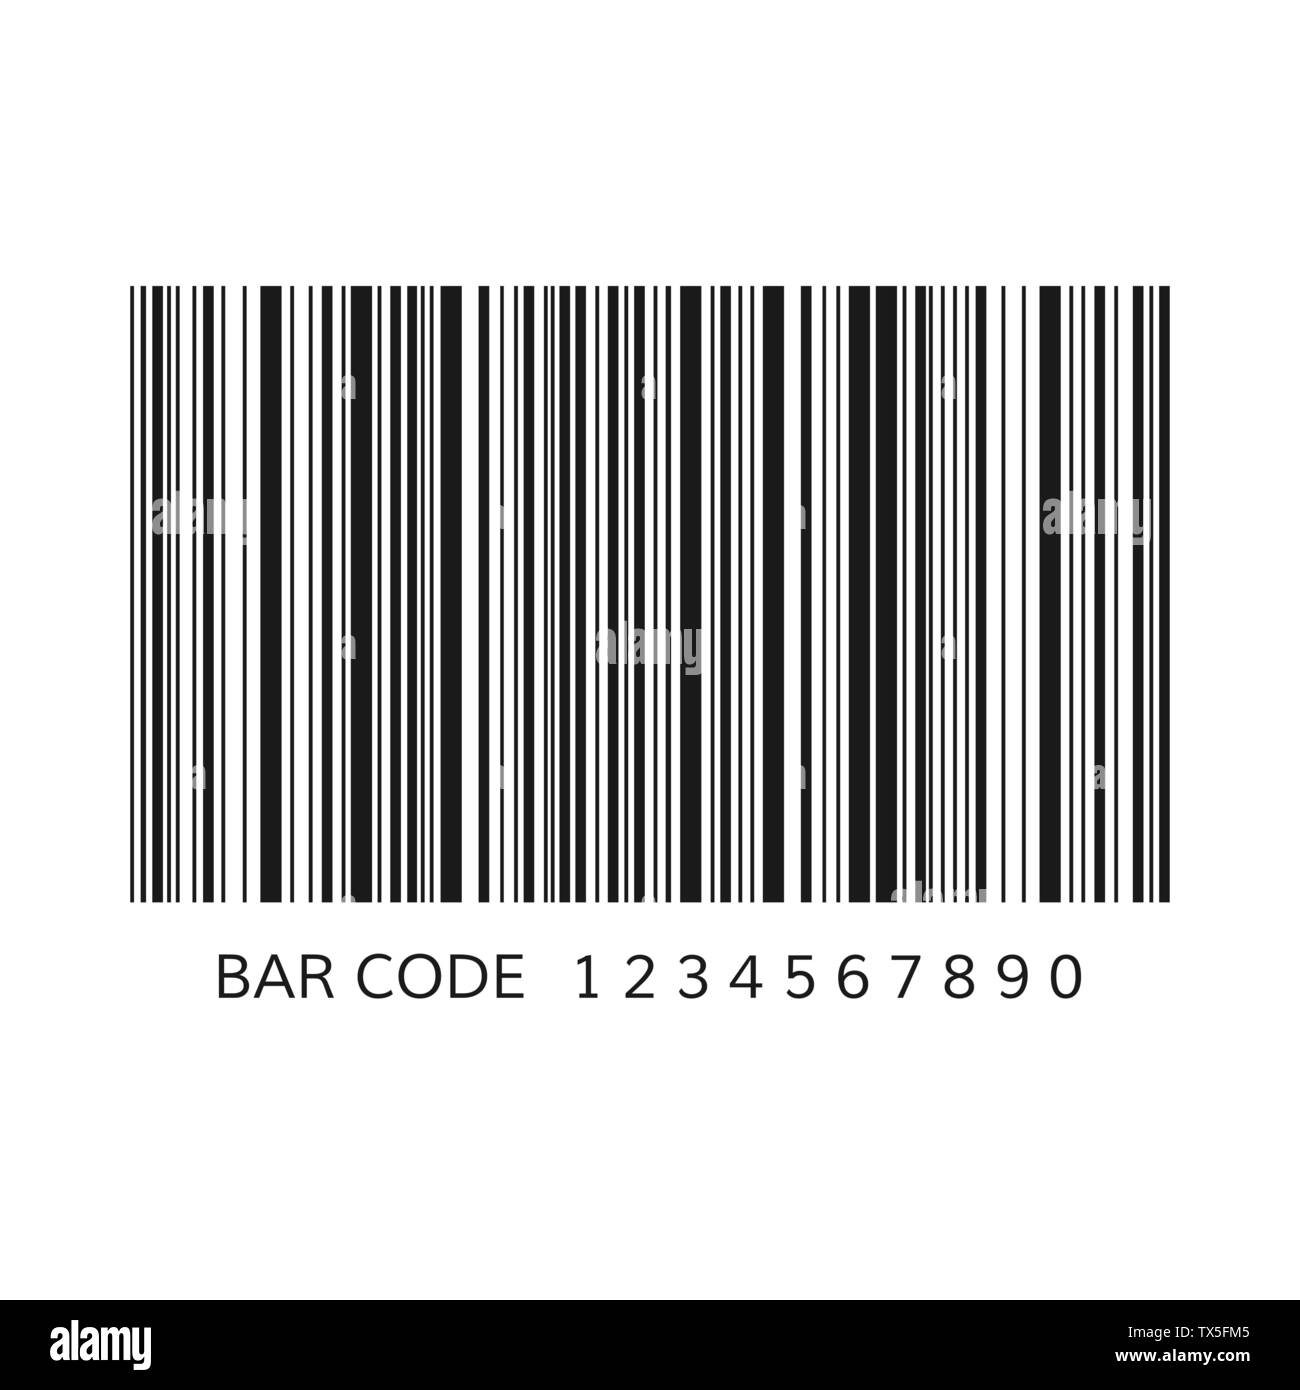 Unique bar code template. Striped identification information about product. Vector illustration isolated on white background Stock Vector